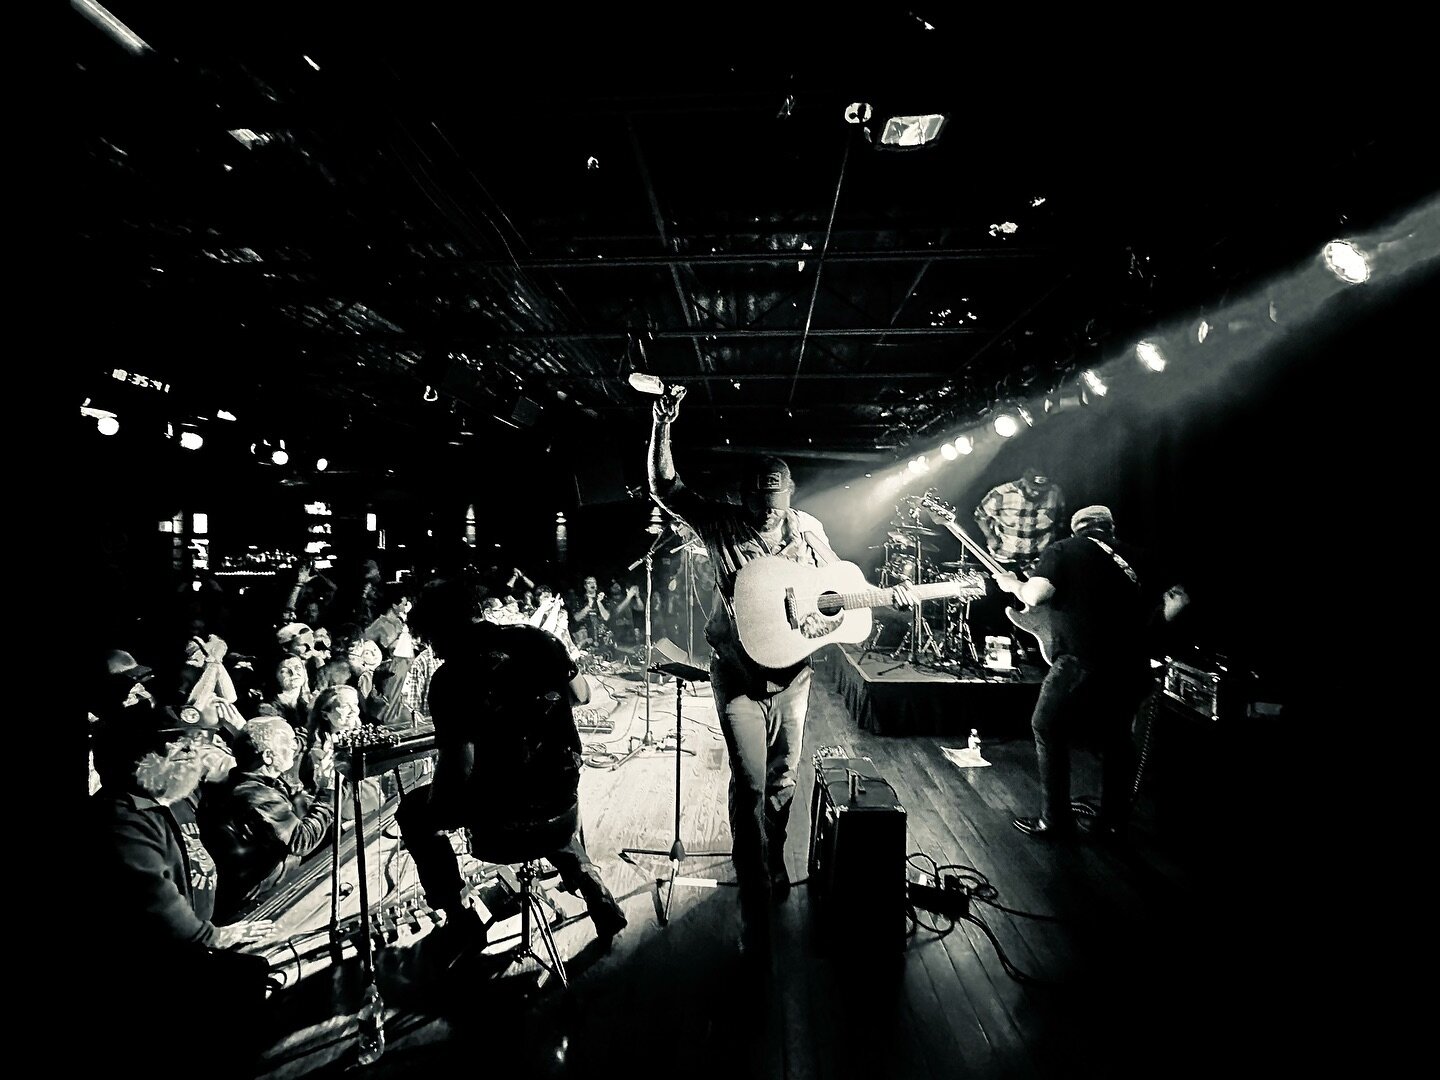 🎶 &ldquo;&hellip;The Road goes on forever and the party never ends&hellip;&rdquo; 🎶

2/1 - Richmond, VA (@thebroadberry) 
2/2 - Saxapahaw, NC (@hawriverballroom)
2/3 - Charlotte, NC (@neighborhoodtheatre) 

📸 @shanaleighphoto